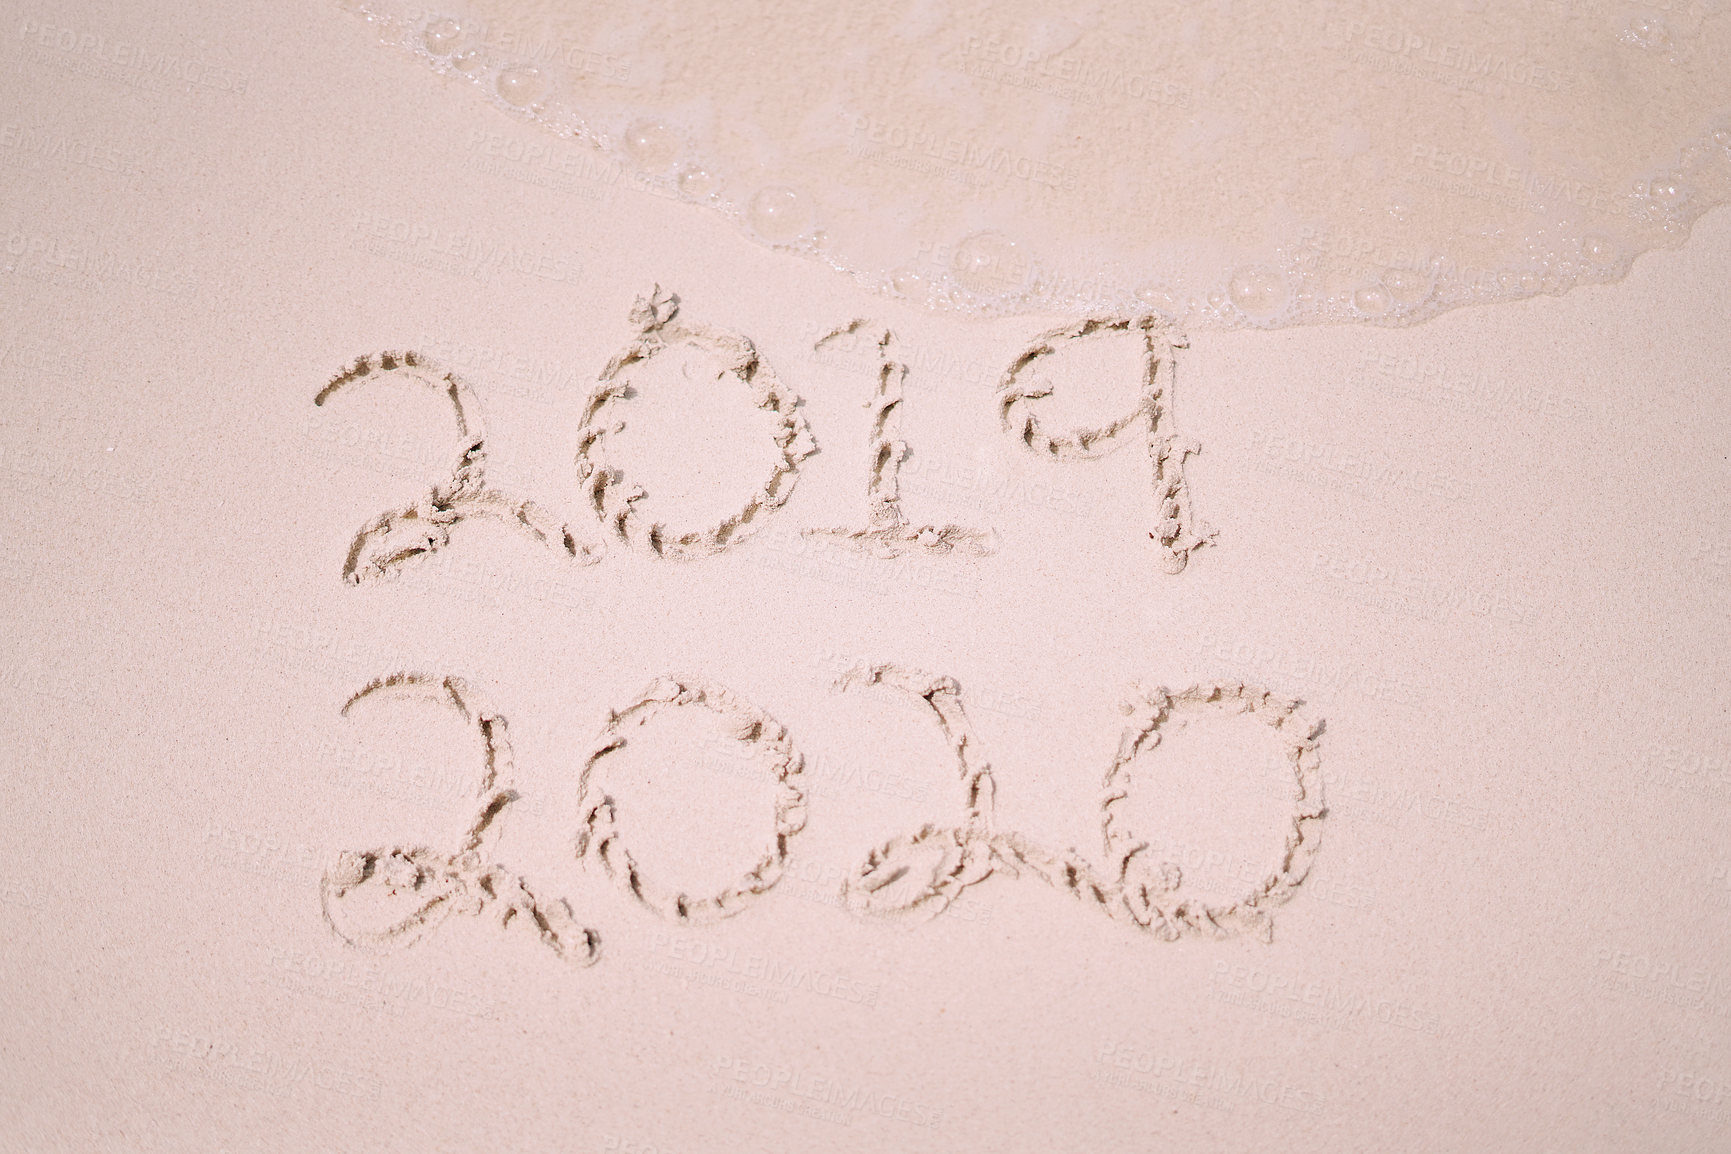 Buy stock photo Still life shot of the years 2019 and 2020 written on sand on a beach in Raja Ampat, Indonesia